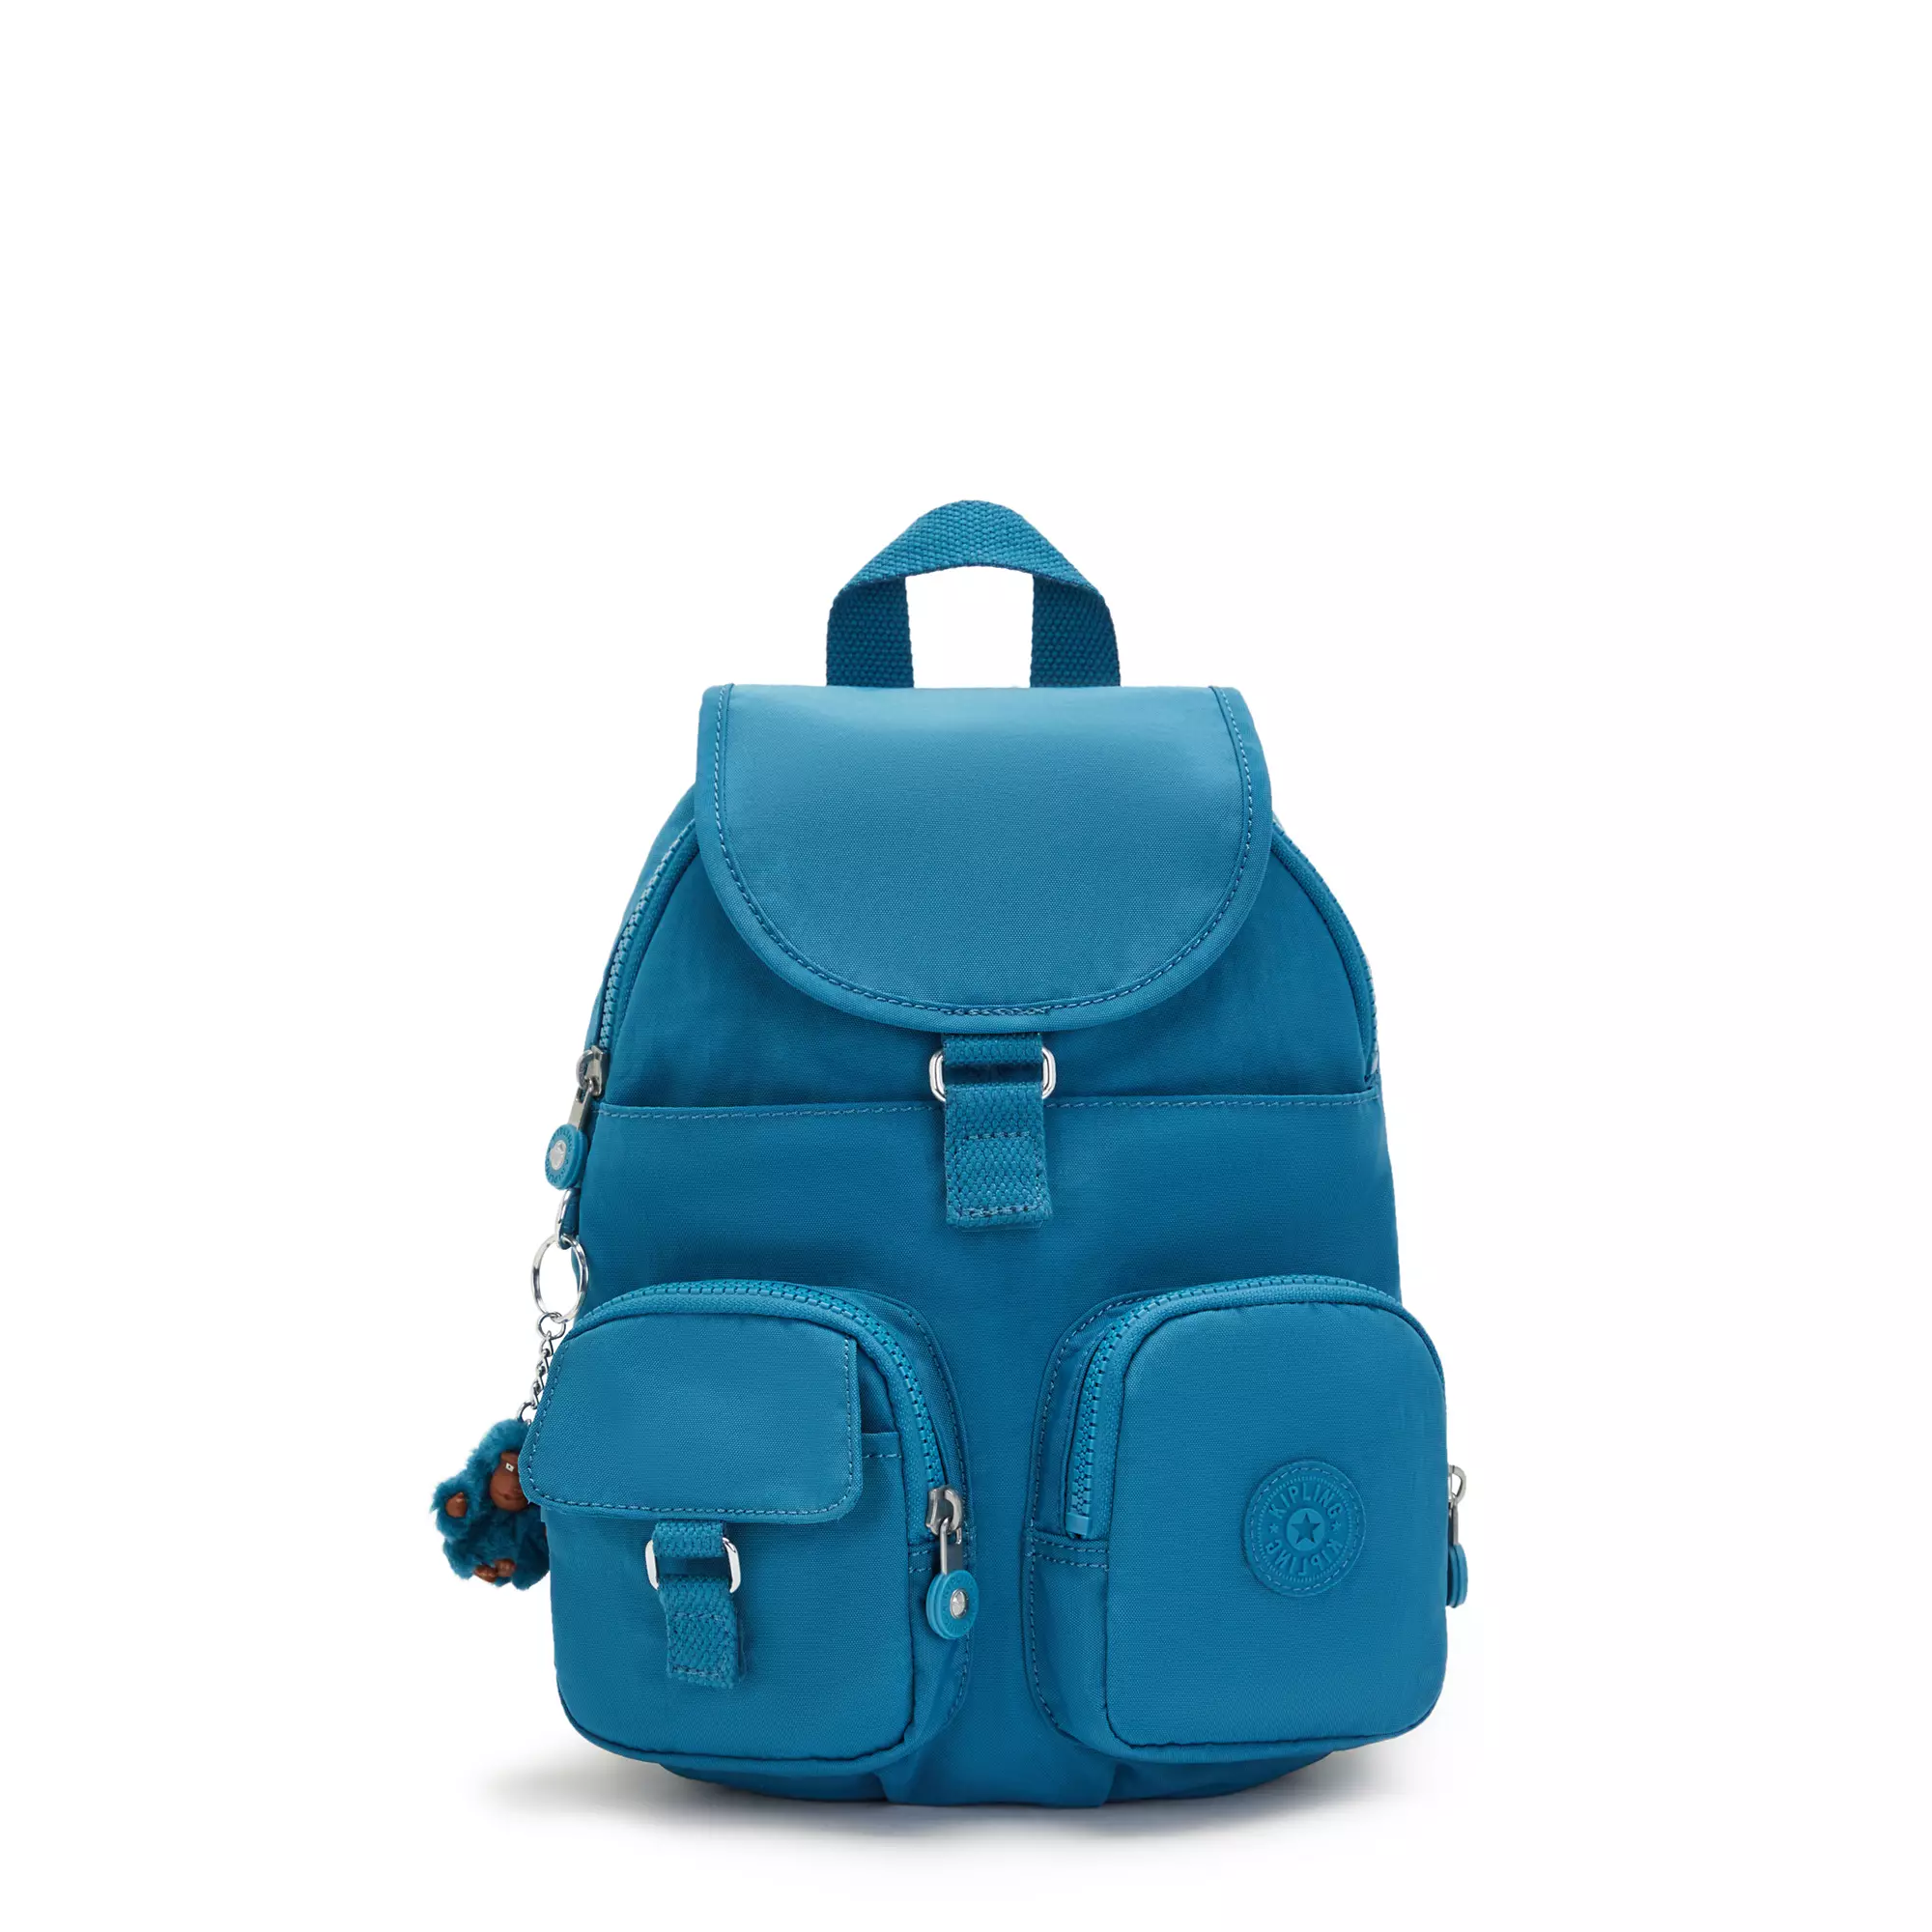 Lovebug Small Backpack, Twinkle Teal, large-zoomed